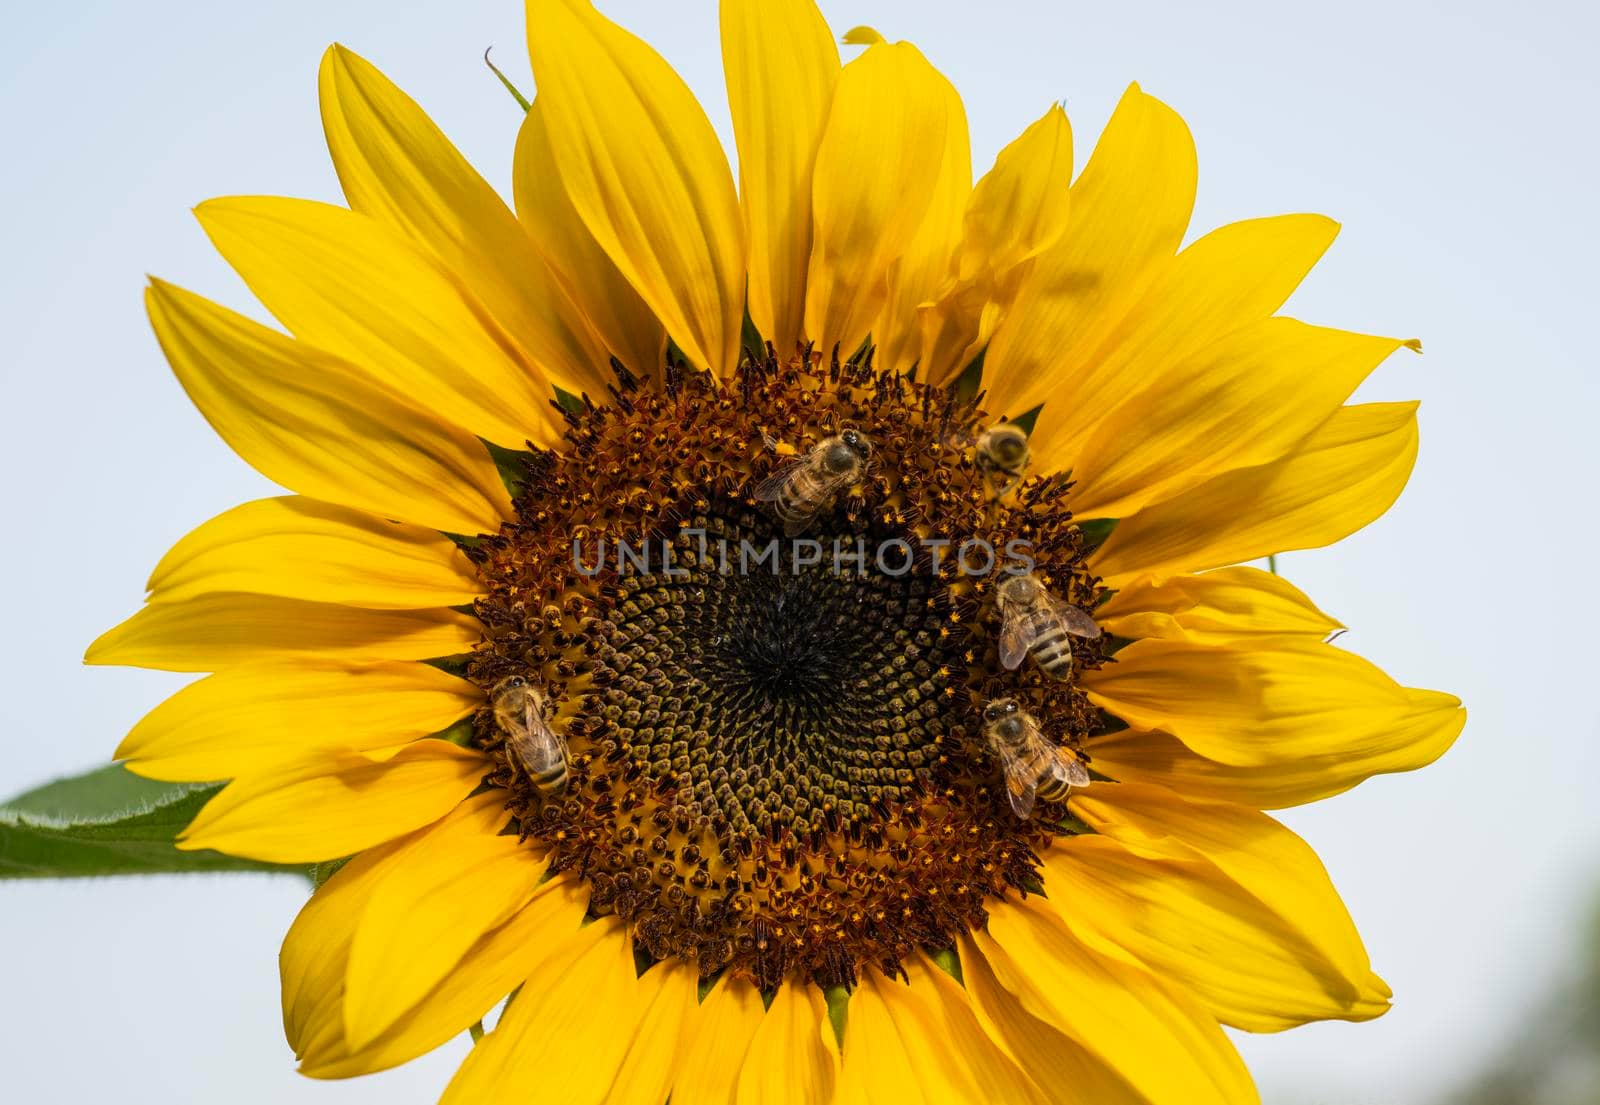 Close-up detail of a yellow sunflower hellanthus annuus honey bee apis collecting pollen in garden on white background